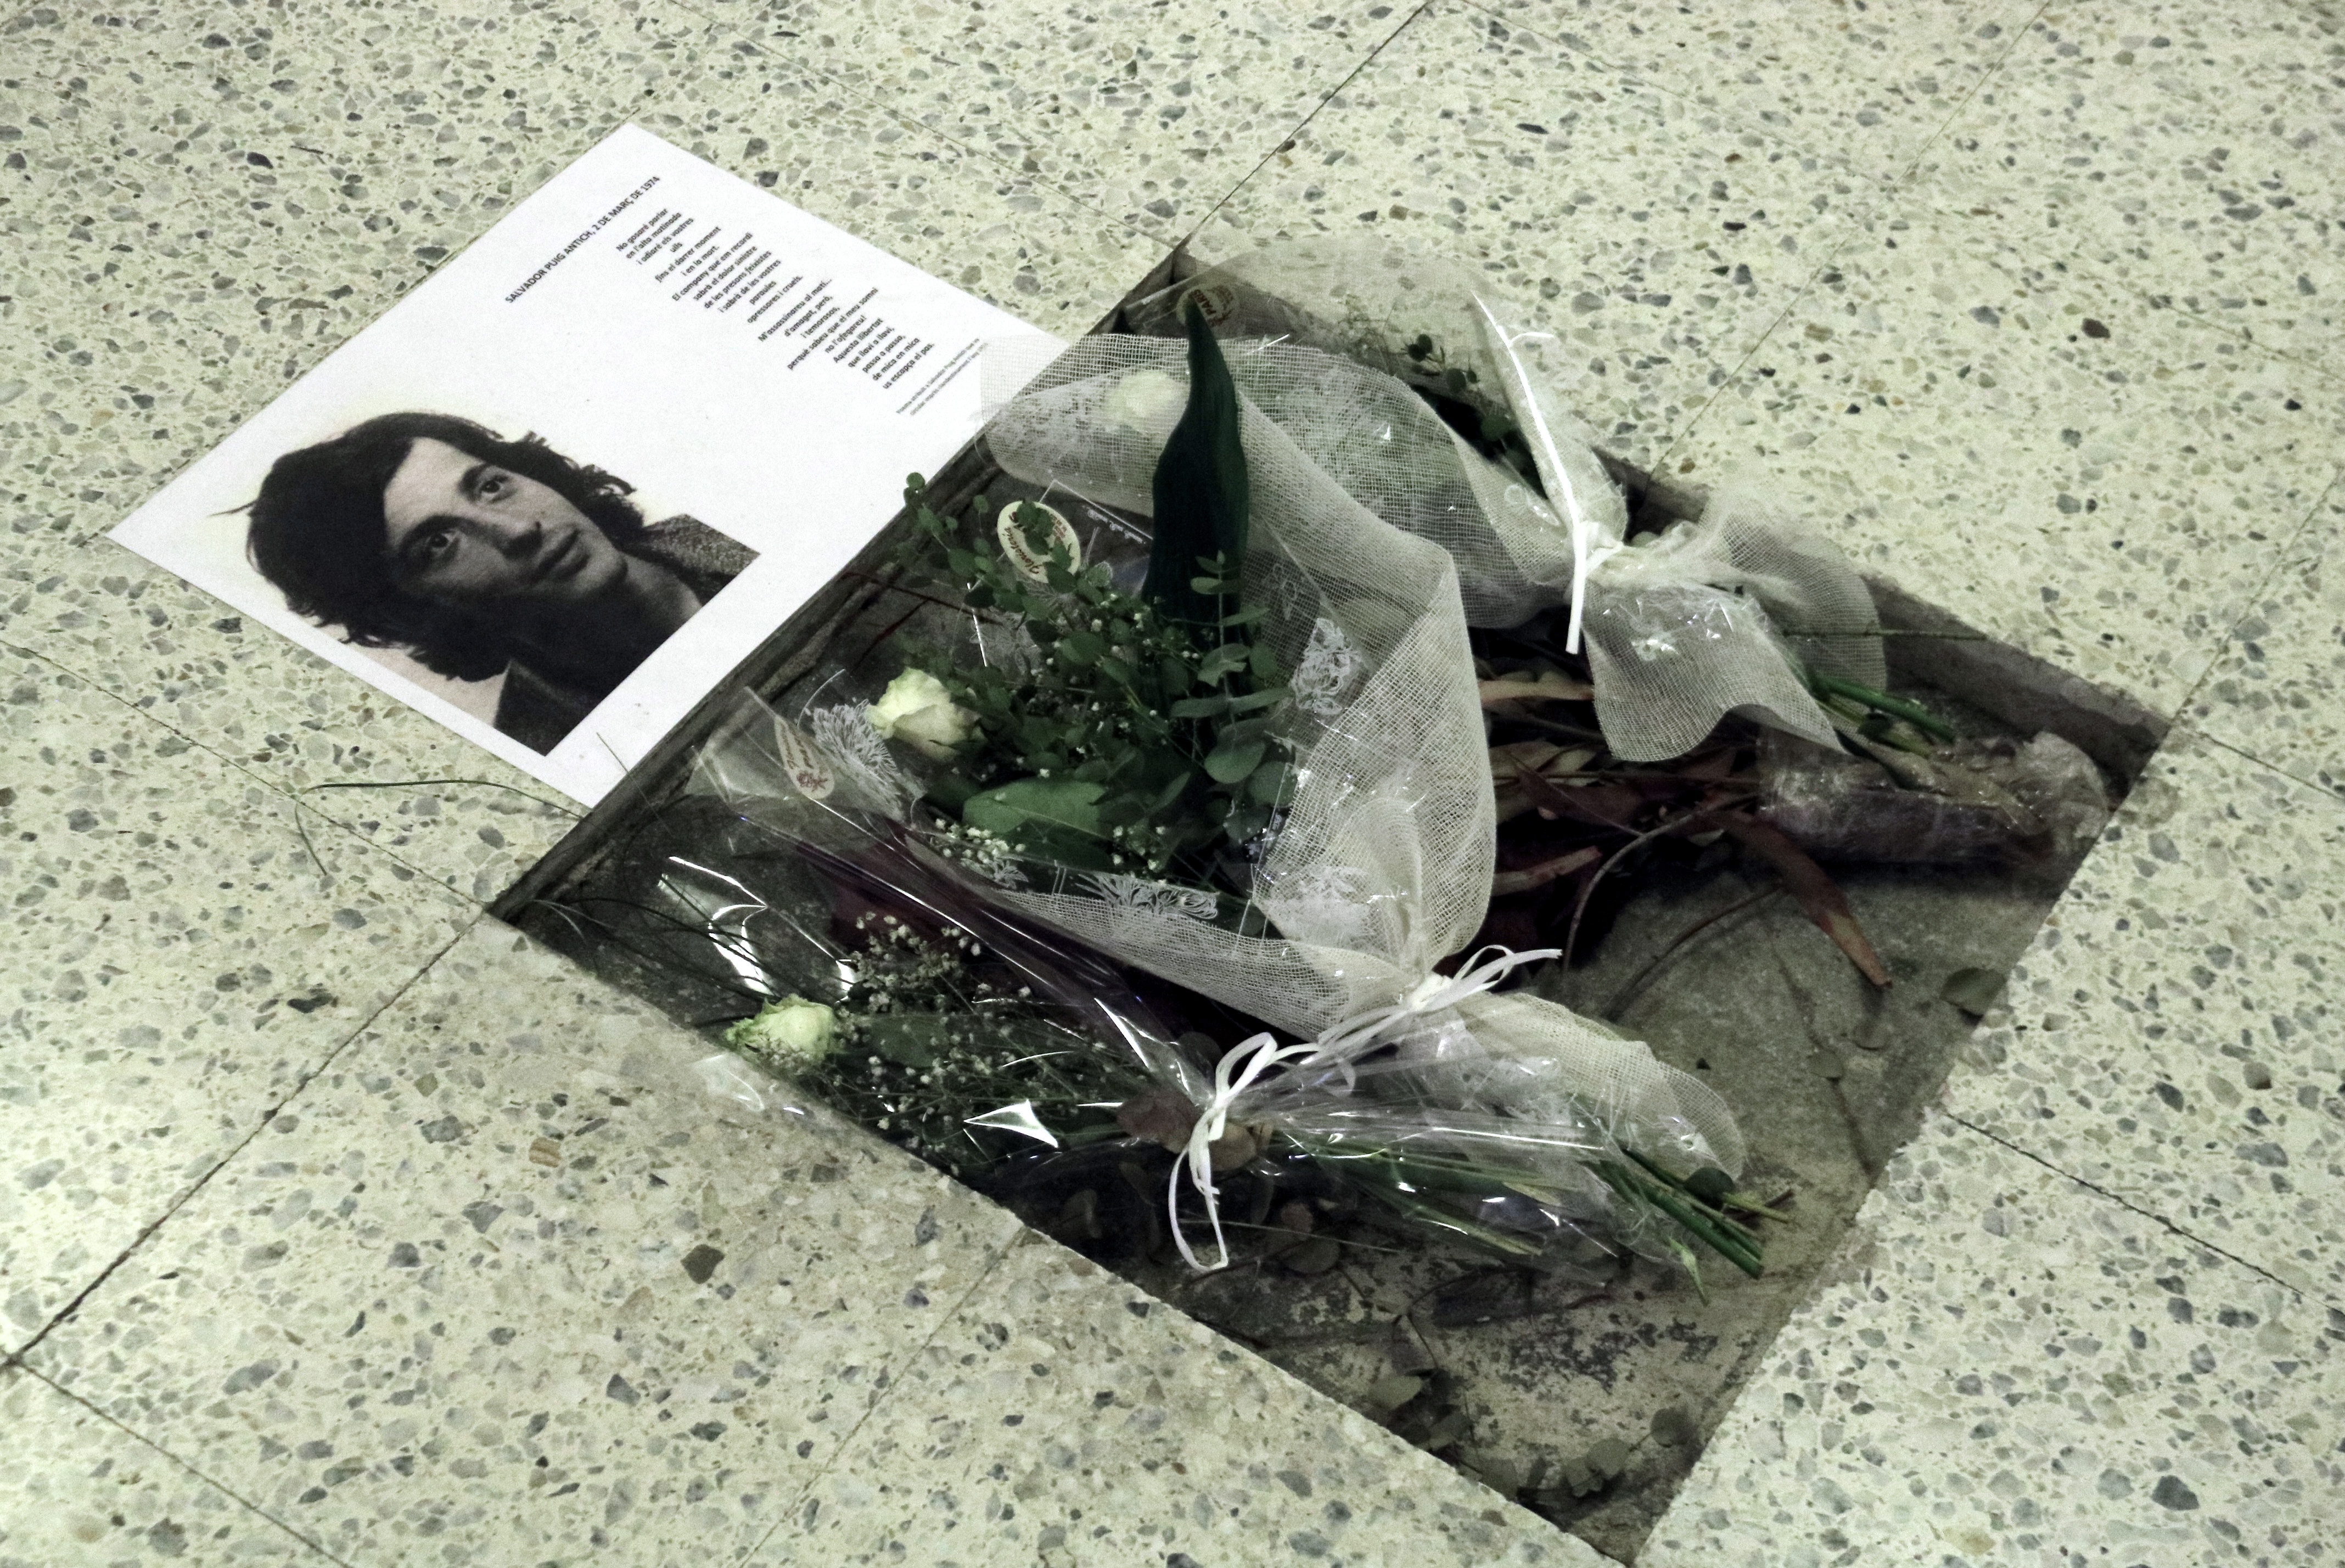 Flowers laid on the floor of La Model prison in memory of Salvador Puig Antich, 50 years after his execution